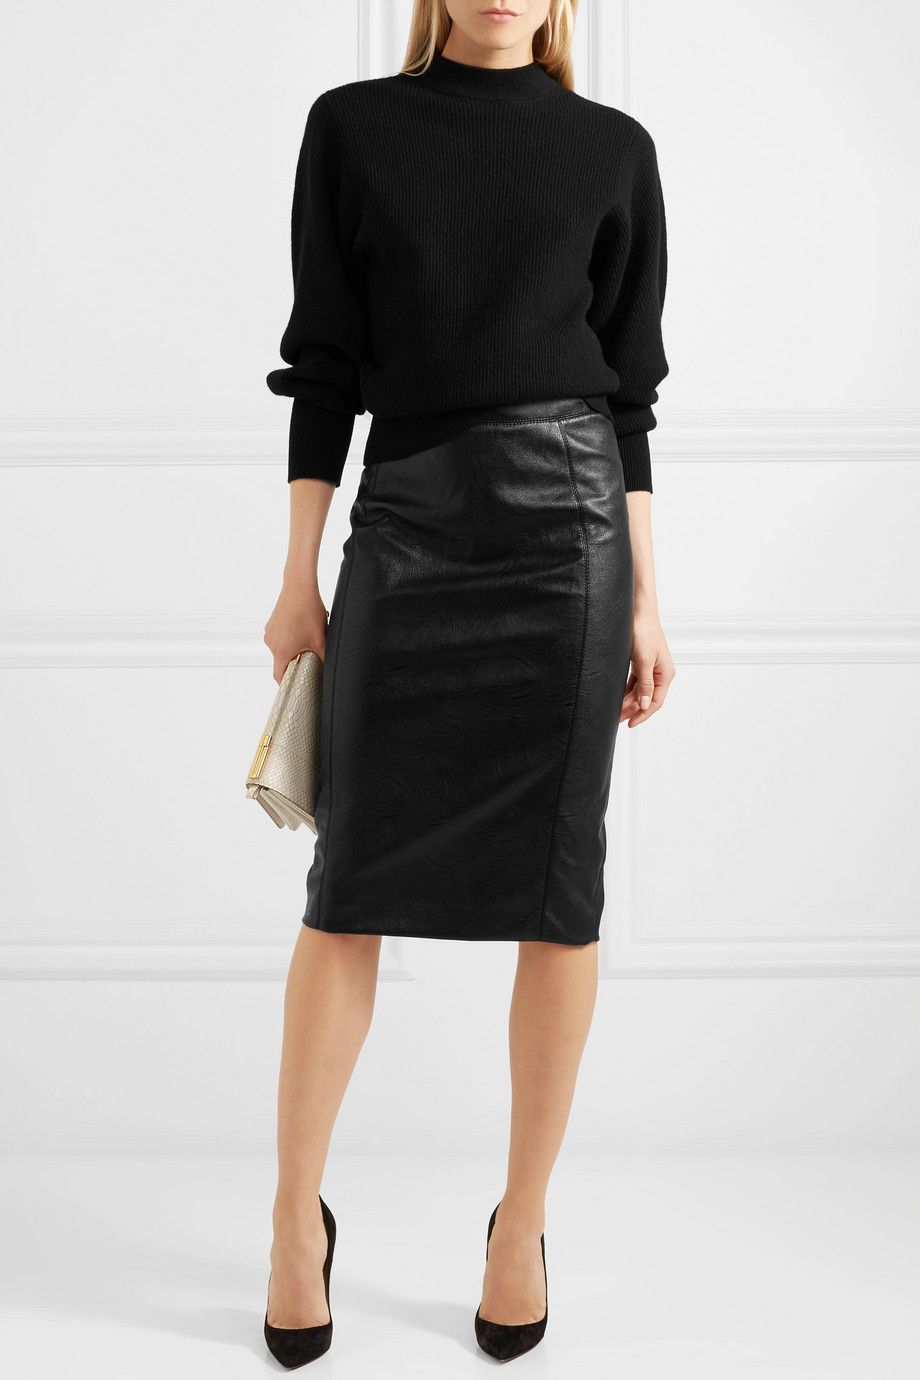 Best 15 Faux Leather Skirt Outfit Ideas for Women